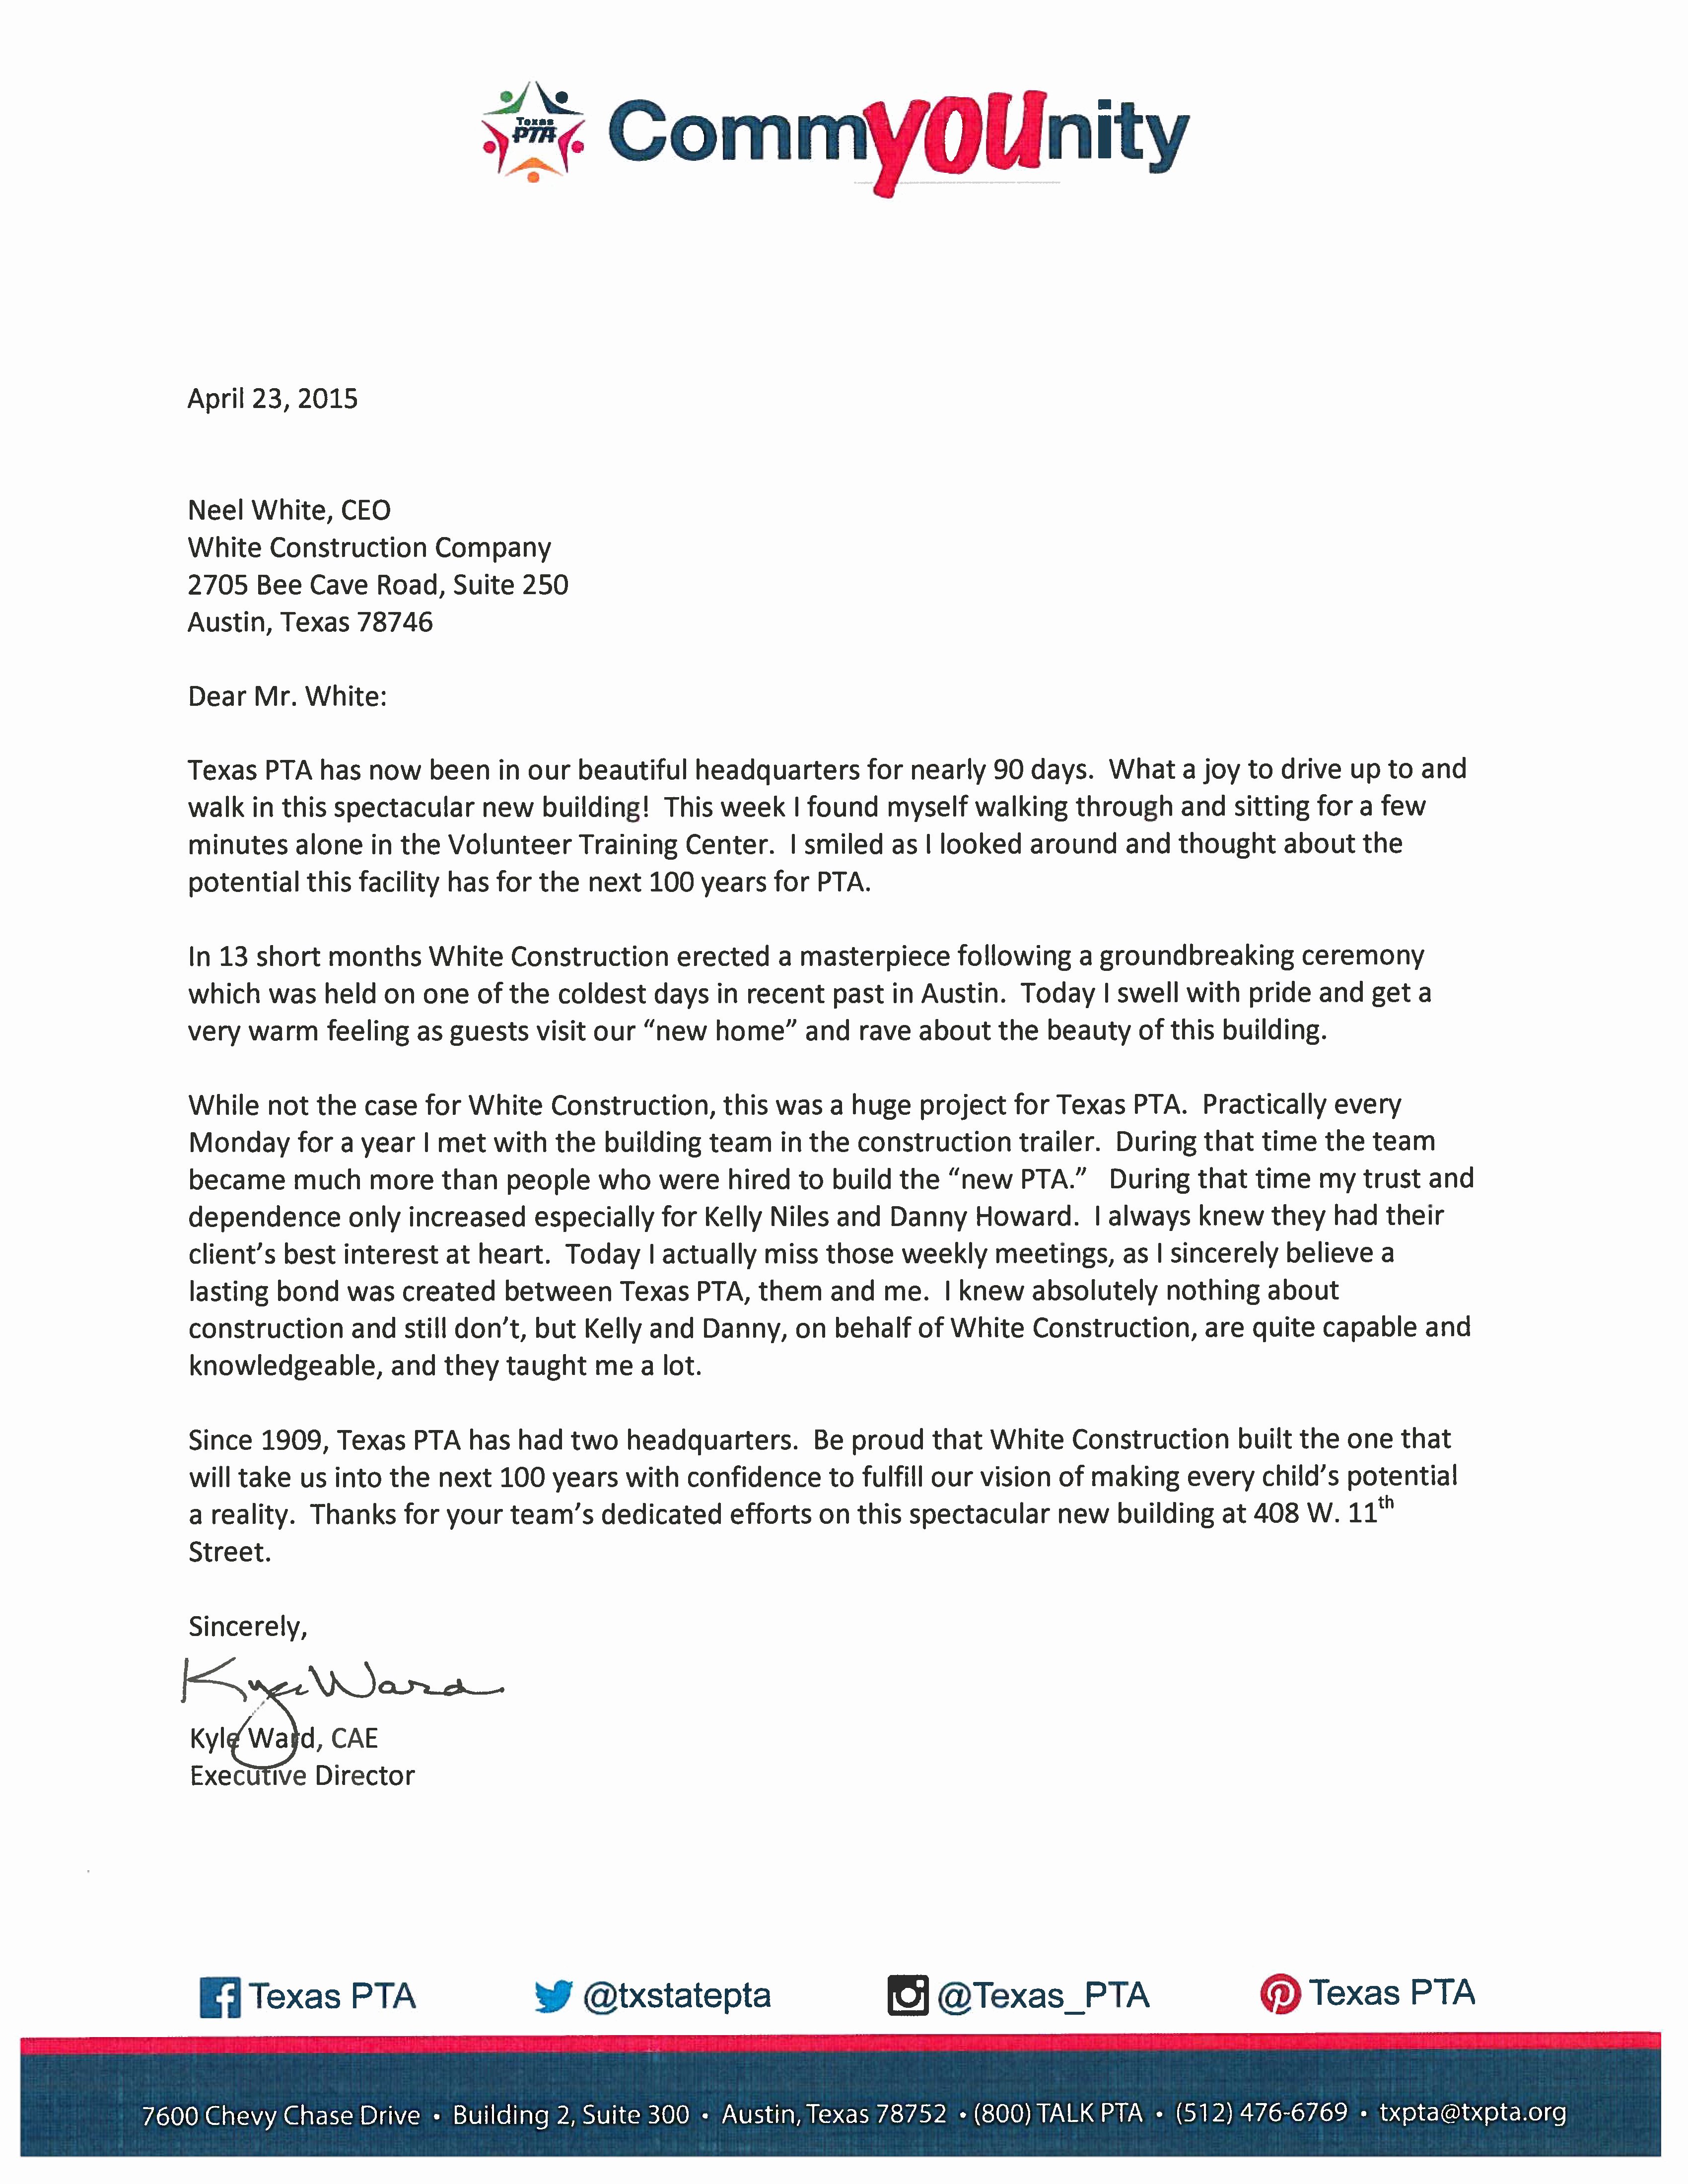 Glowing Letter Of Recommendation Elegant Glowing Endorsement From Texas Pta Executive Director